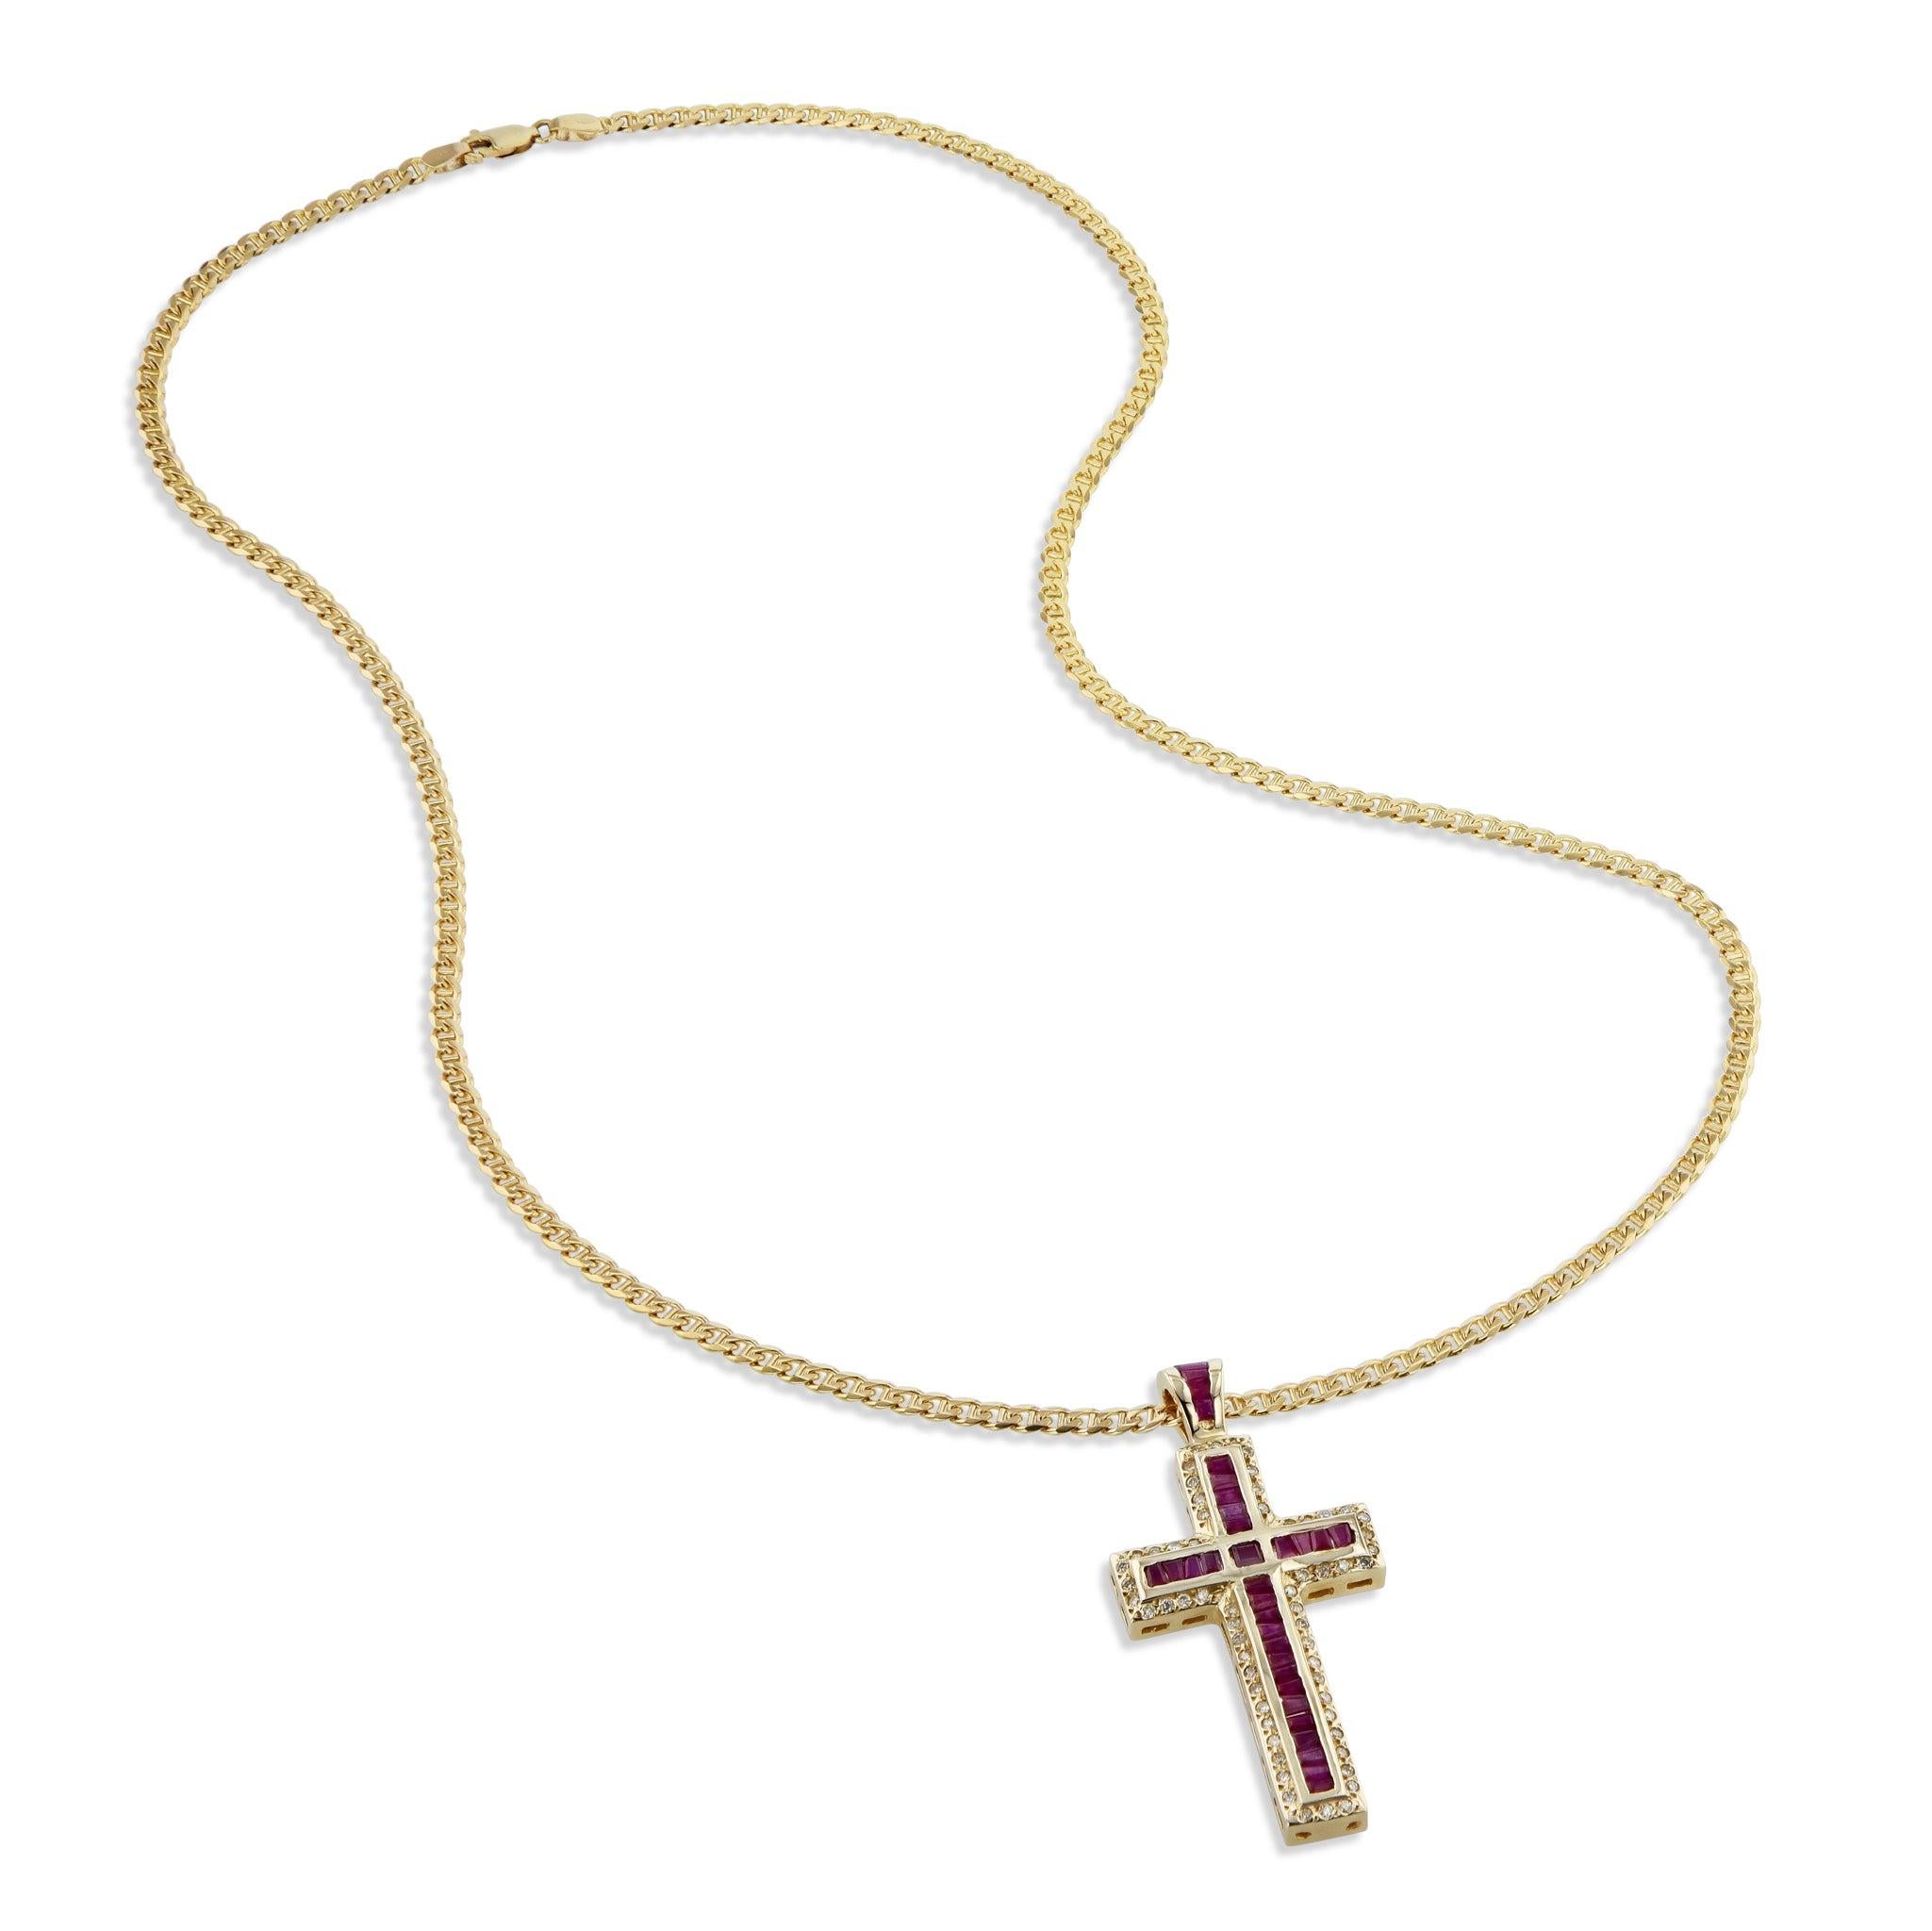 Feel divinely inspired and magnificently blessed with this exquisite Ruby and Diamond Yellow Gold Cross Pendant Estate - crafted to perfection with 14K Yellow Gold and headlined by dazzling Rubies, plus 60 twinkling Diamonds. An exquisite piece of